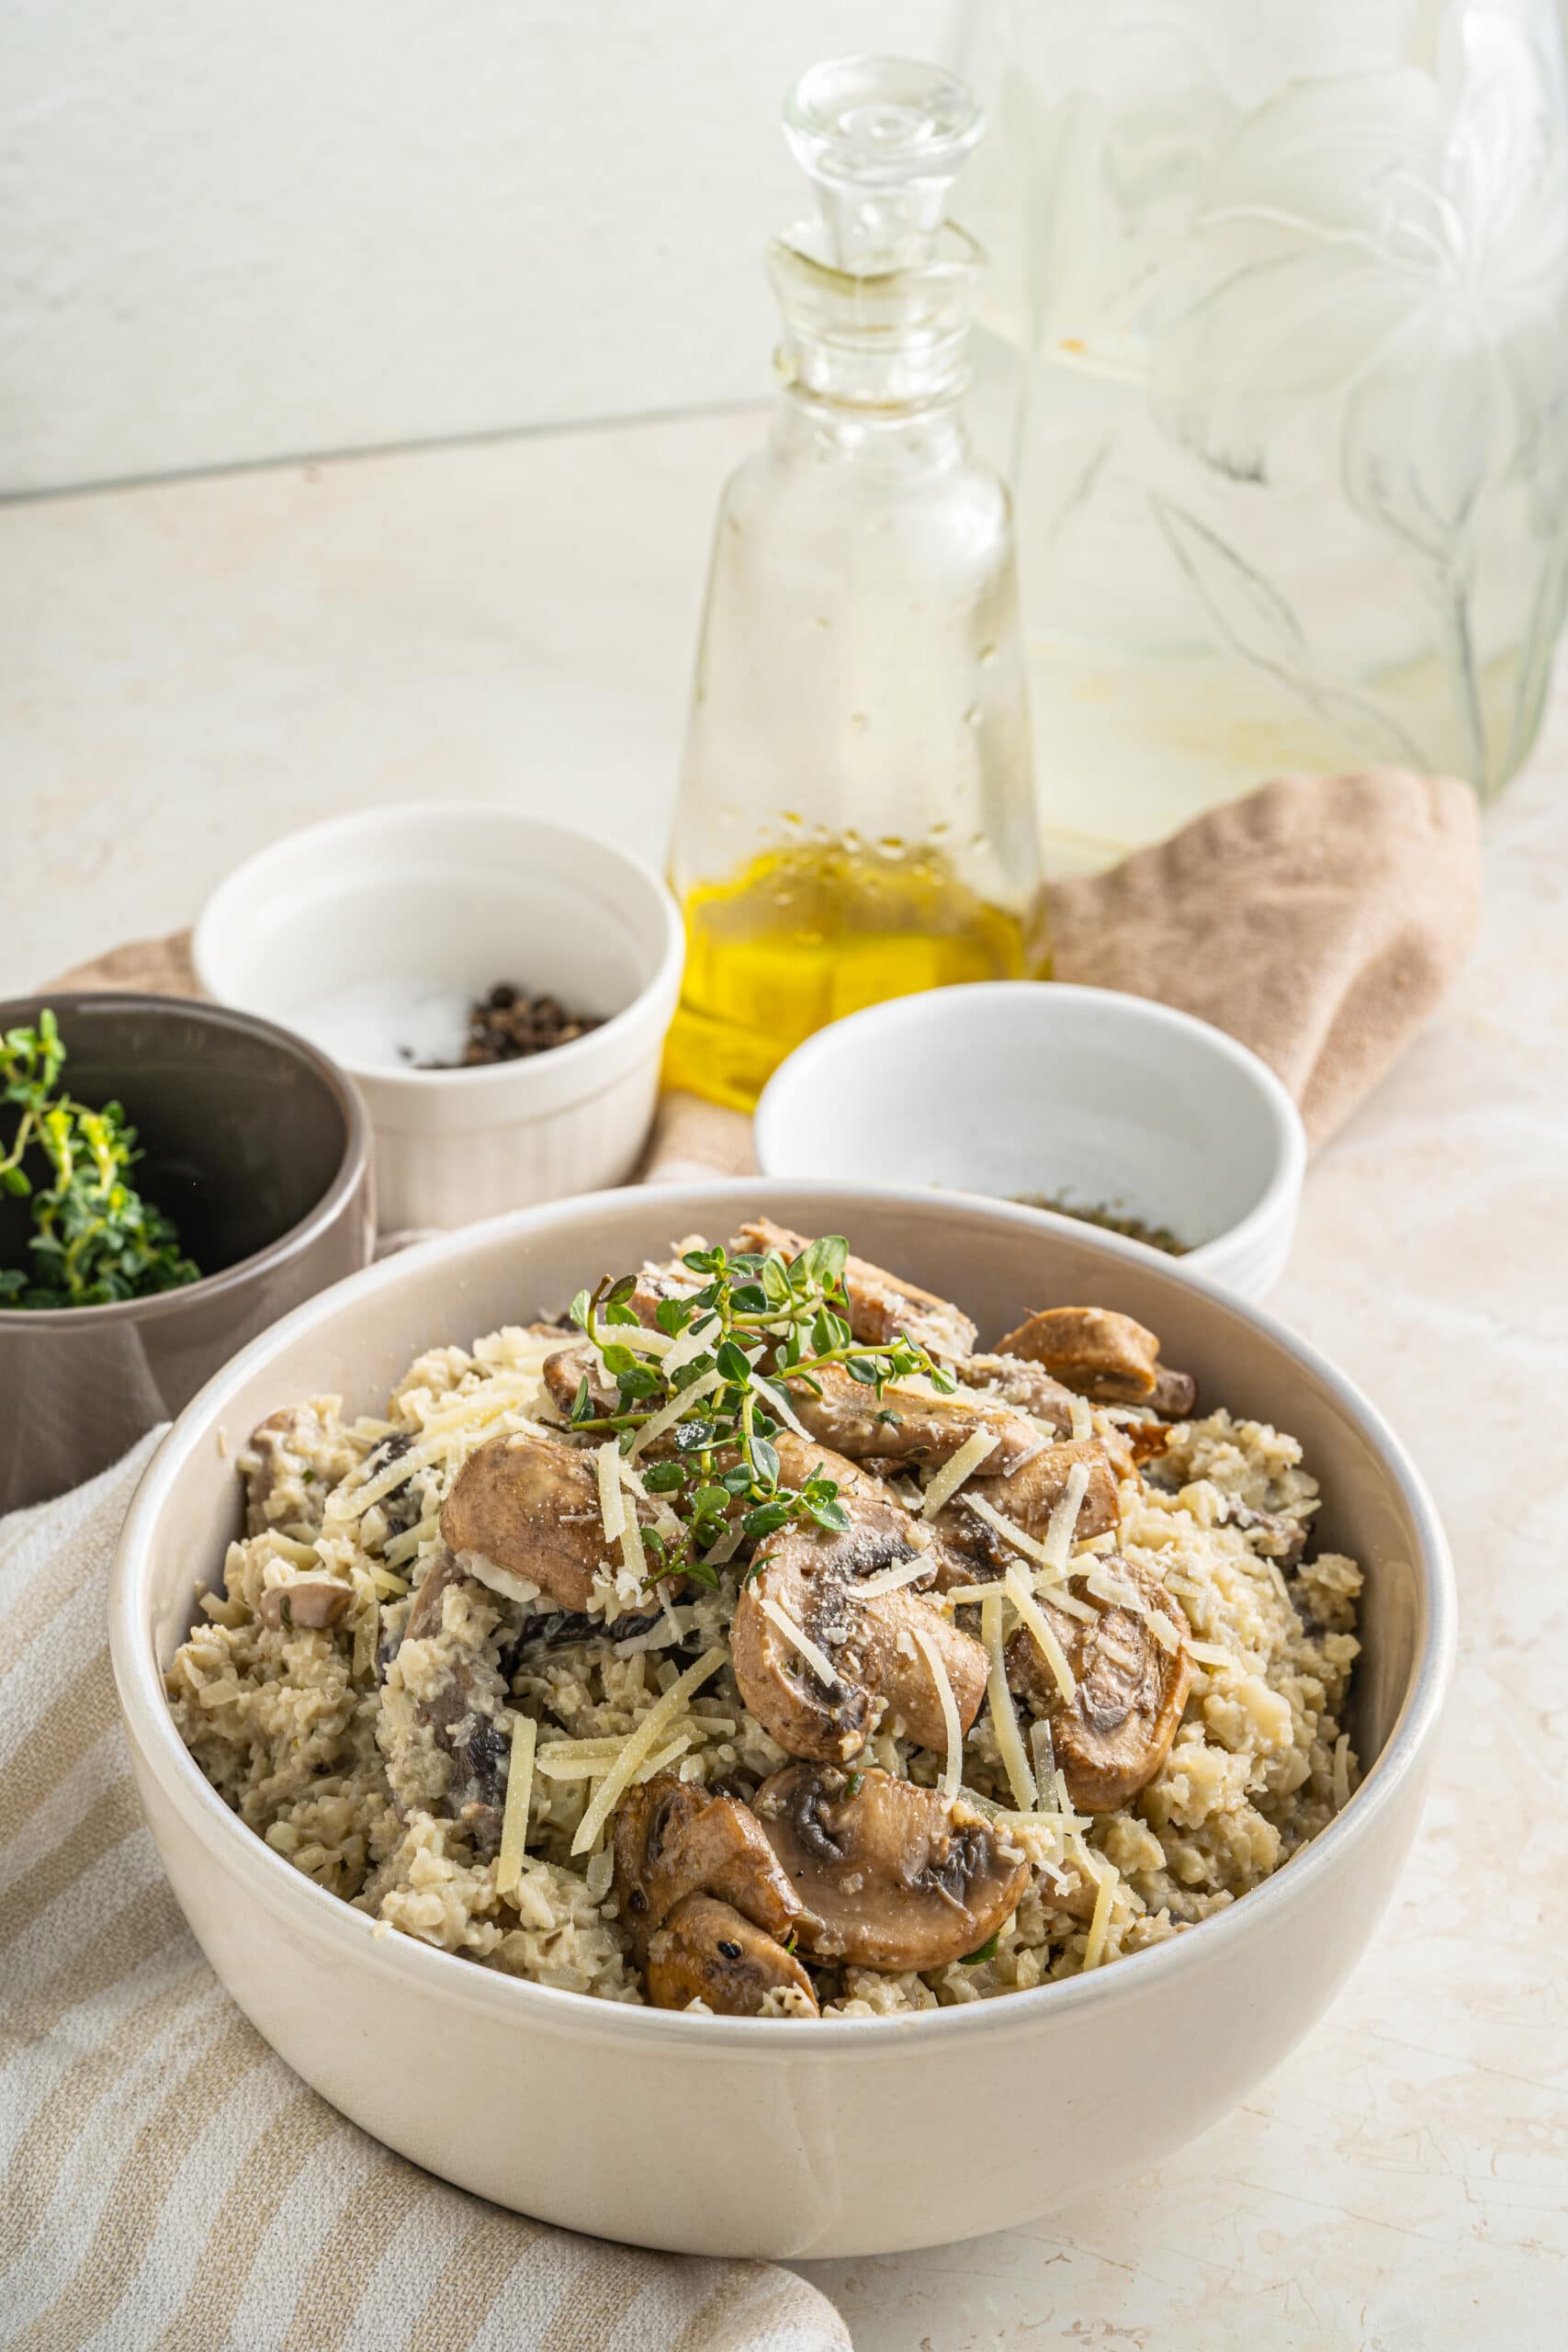 Picture of cauliflower rice risotto close up with mushrooms and shredded cheese on top with two small white jars of seasonings up top behind an olive oil jar and a brown bowl of green spices.